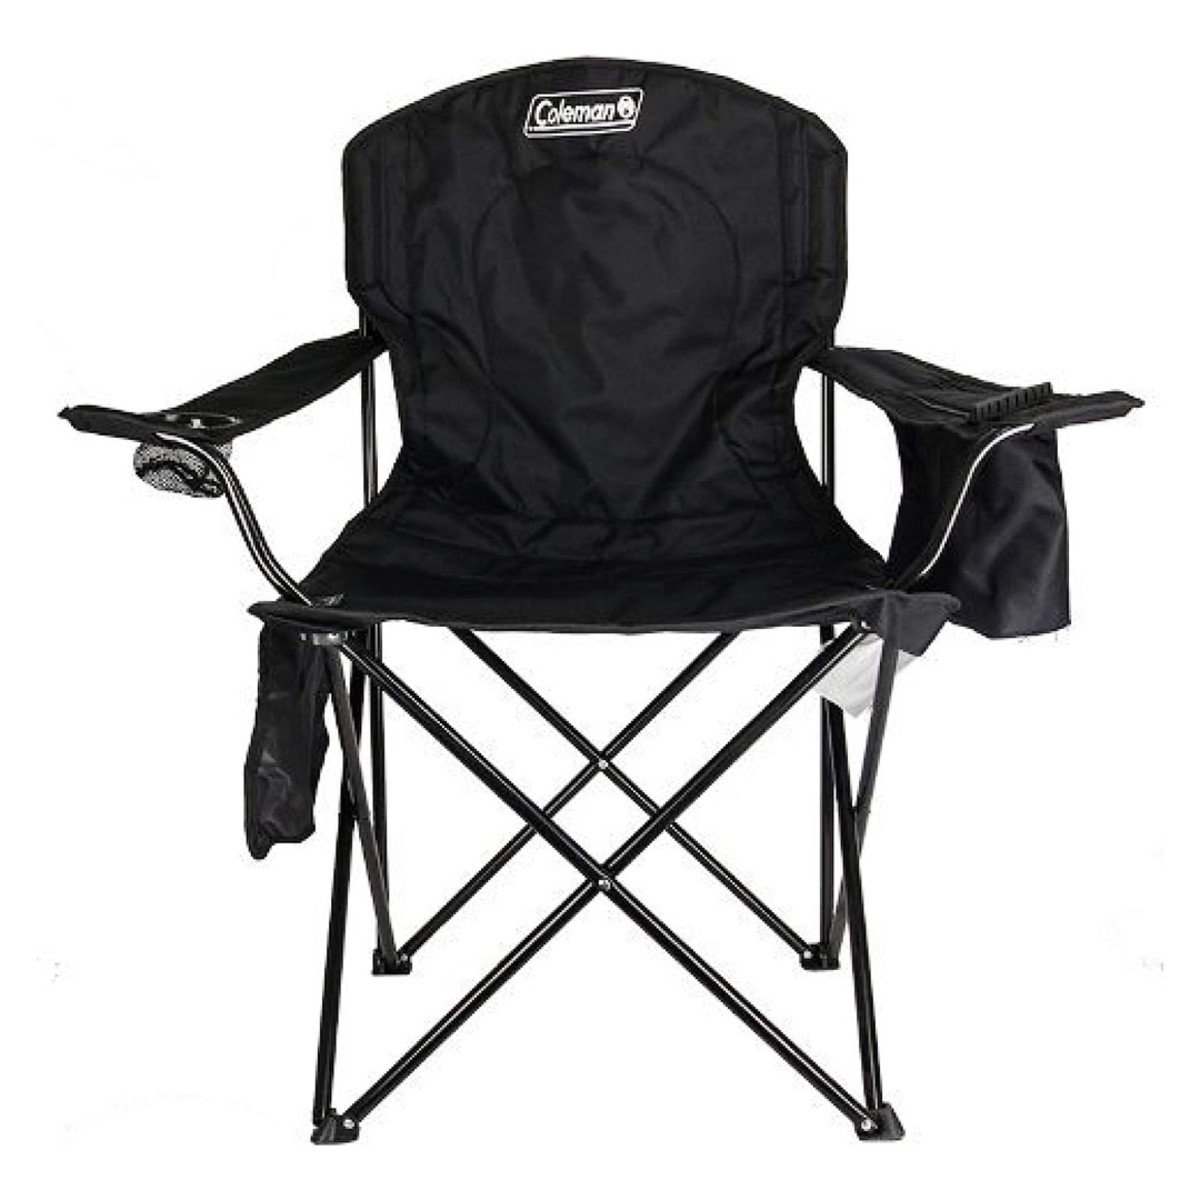 The Coleman Portable Camping Chair Is Now $35 on  - Men's Journal